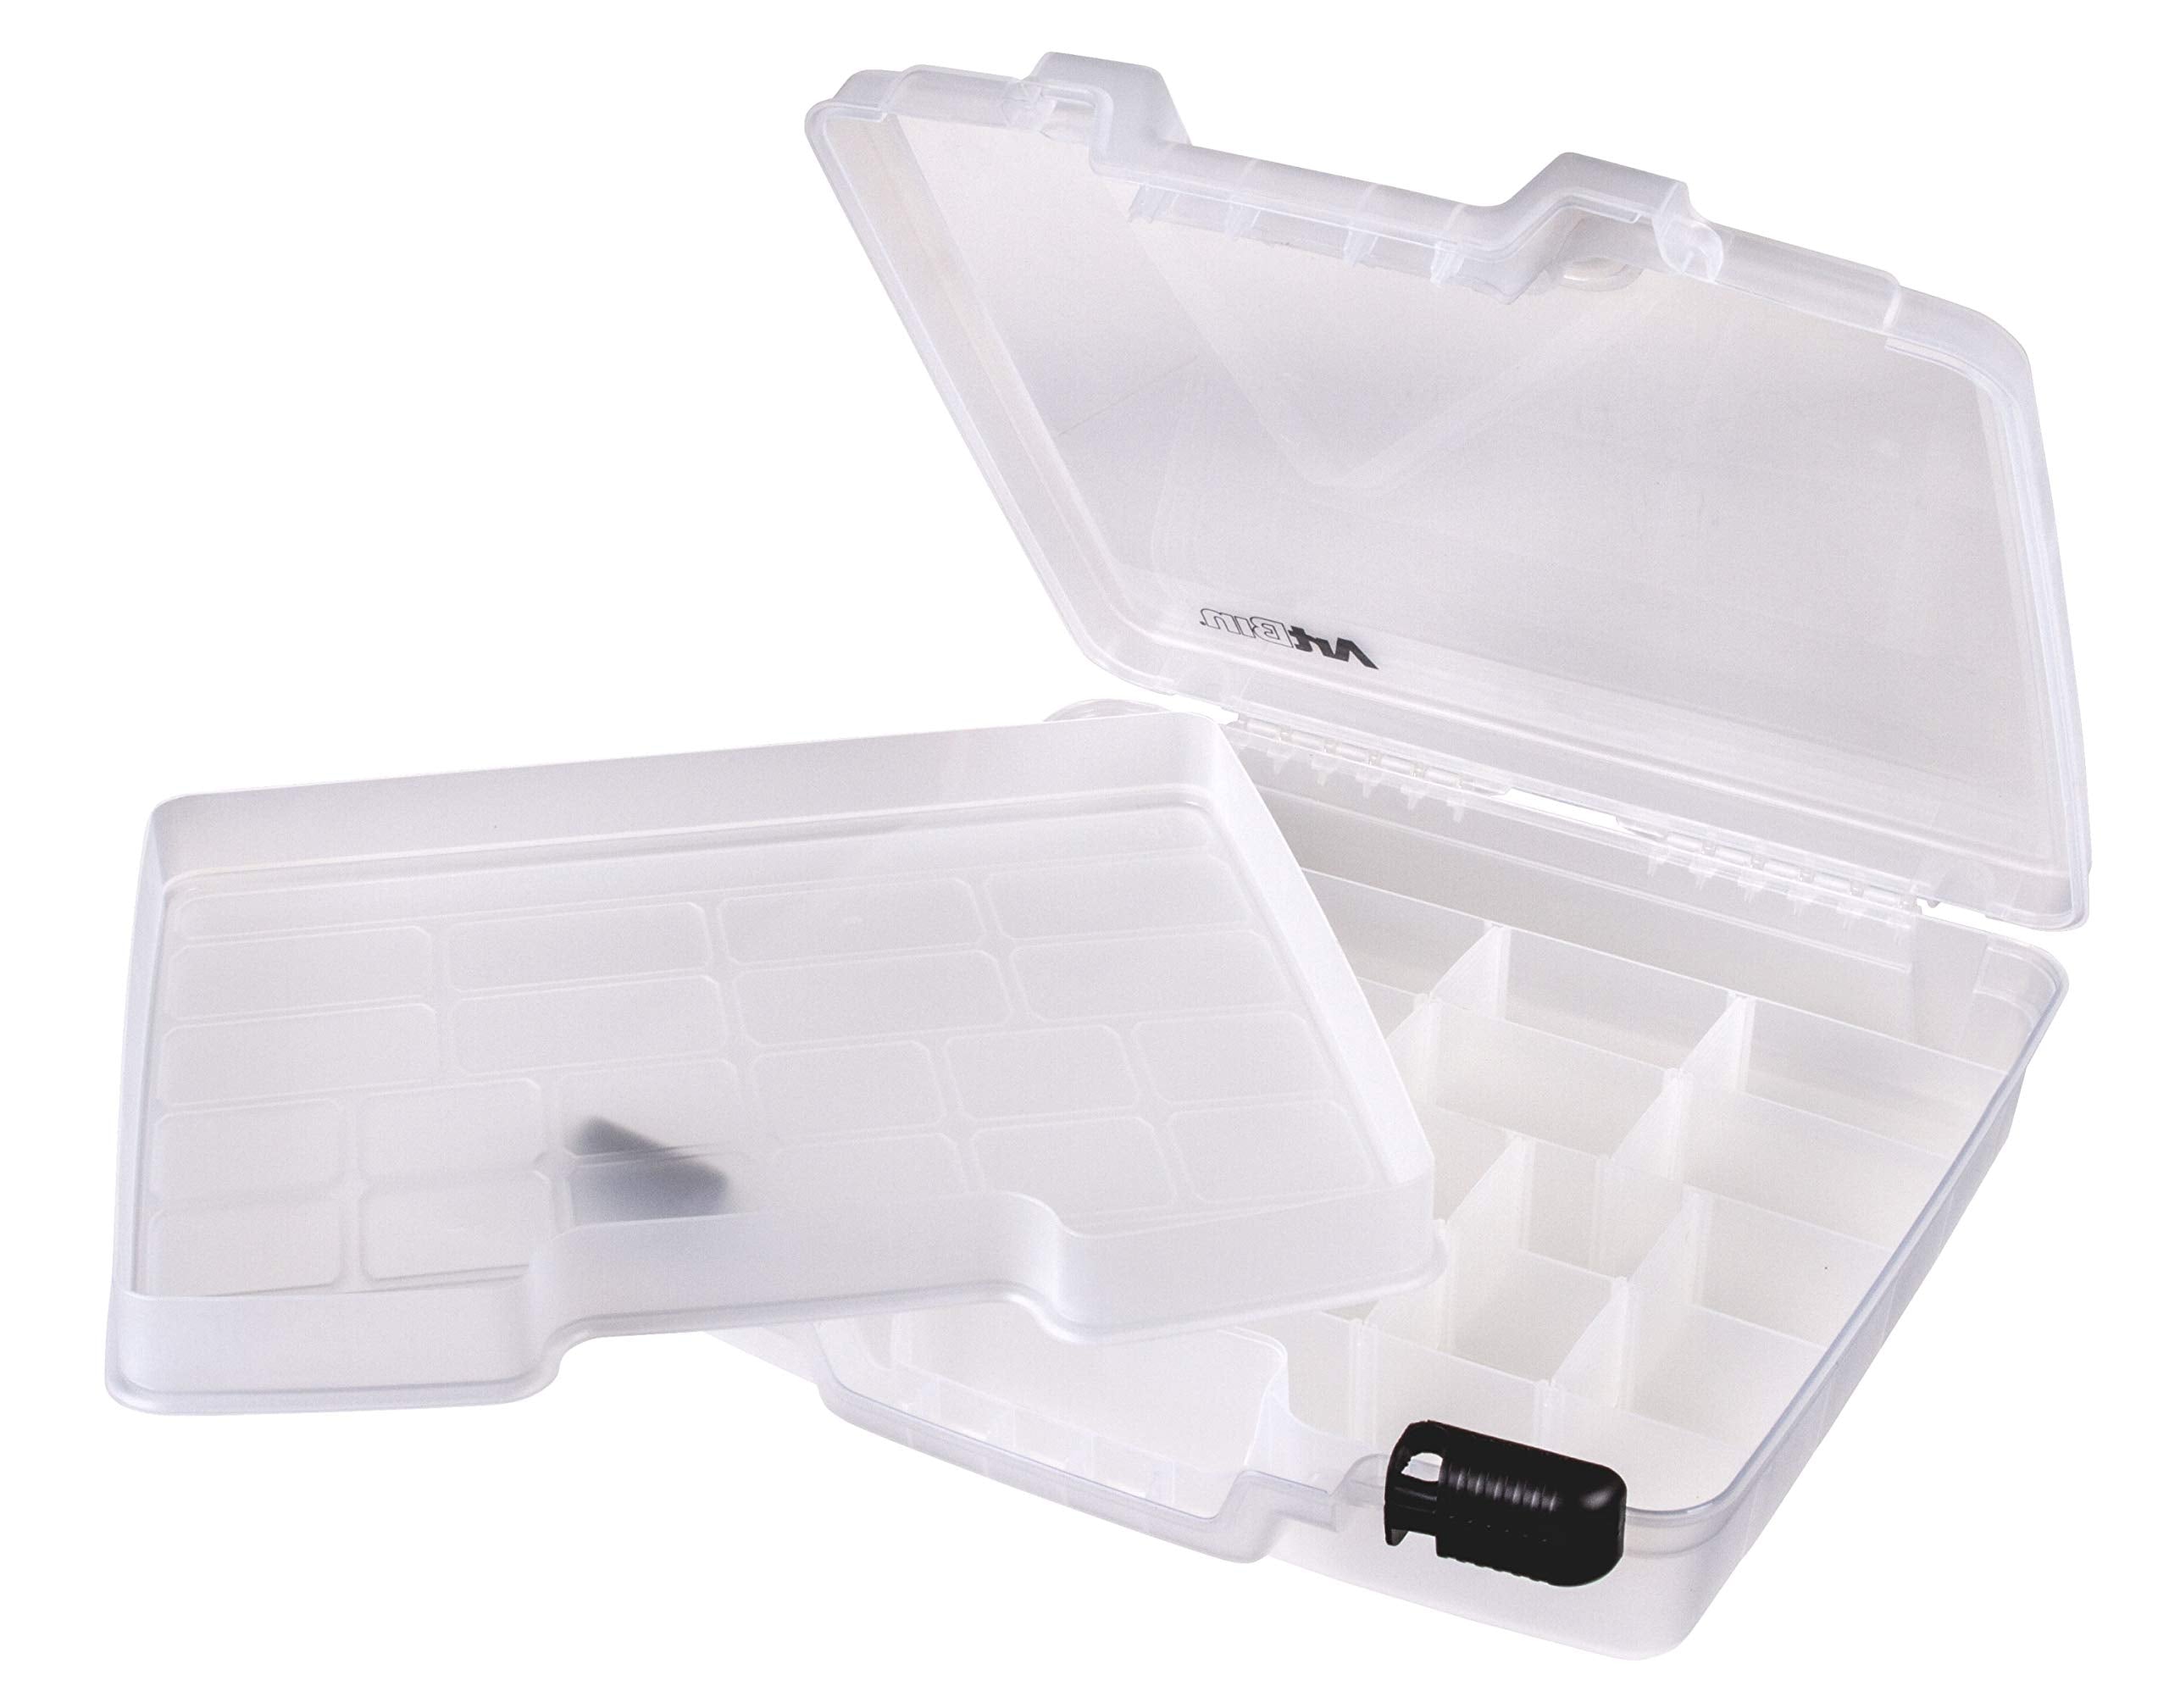 ArtBin Quick View Deep Base Carrying Case, Divided Base with Lift Out Tray-  Clear, Great for Coloring Book Storage, 6962AB